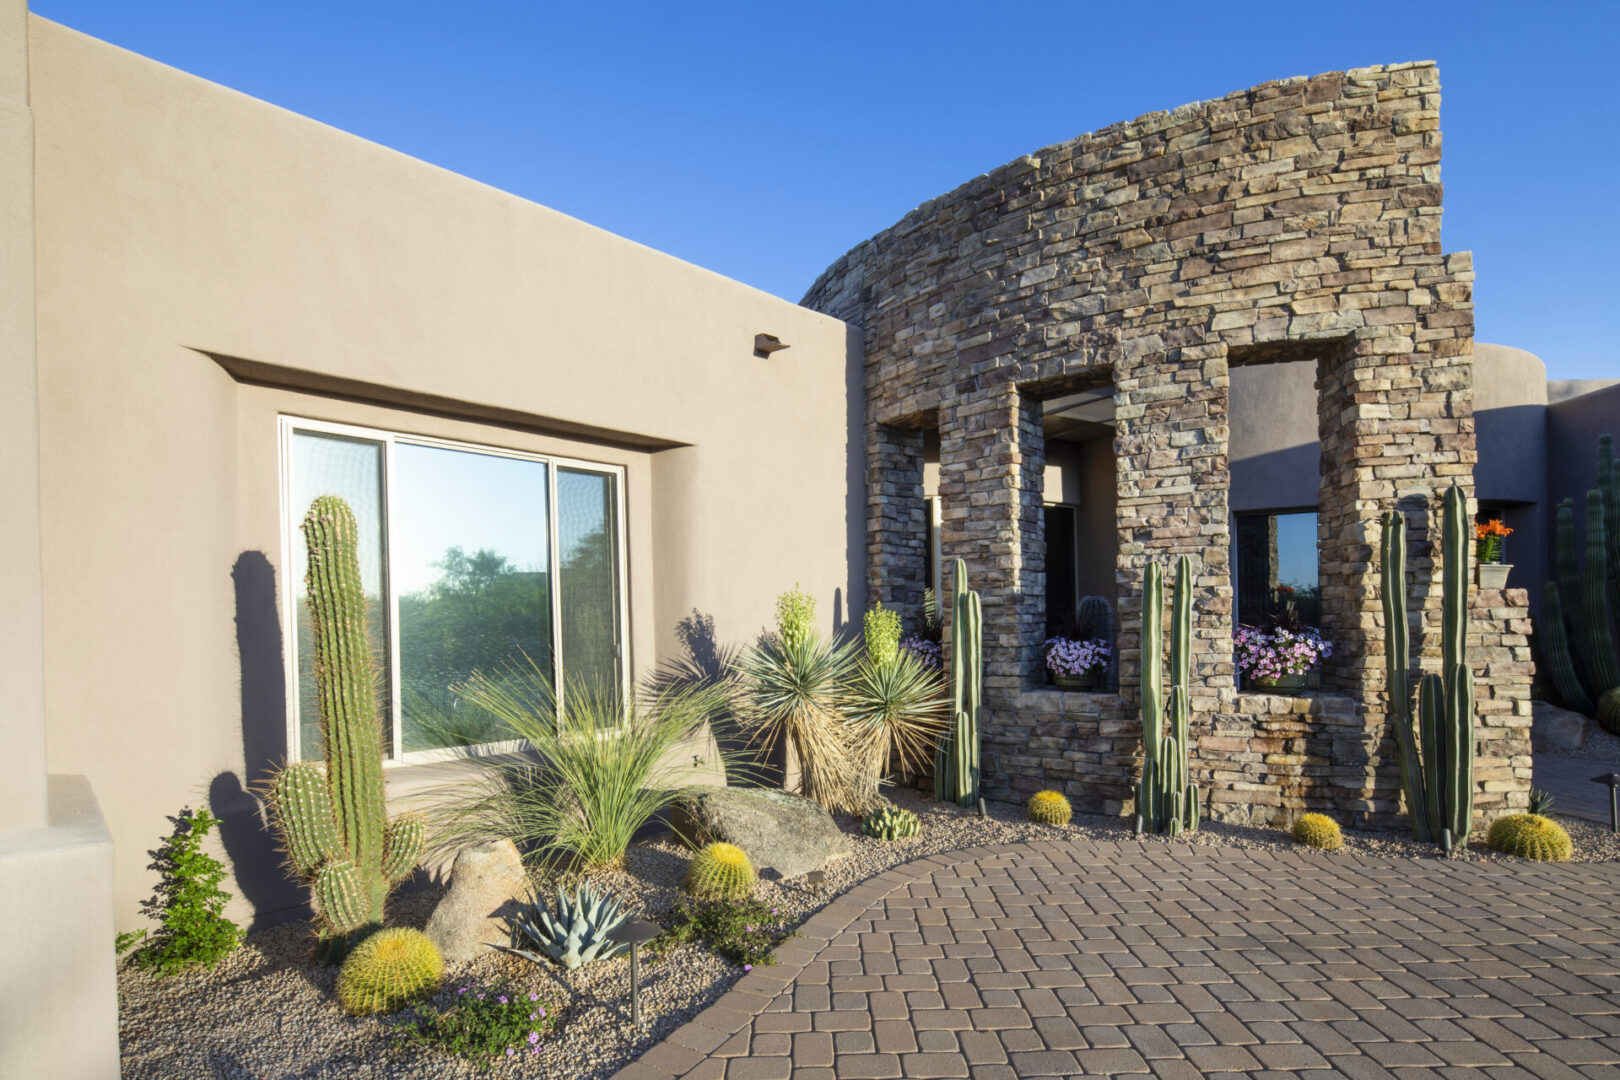 A stone building with cactus and plants in front of it.